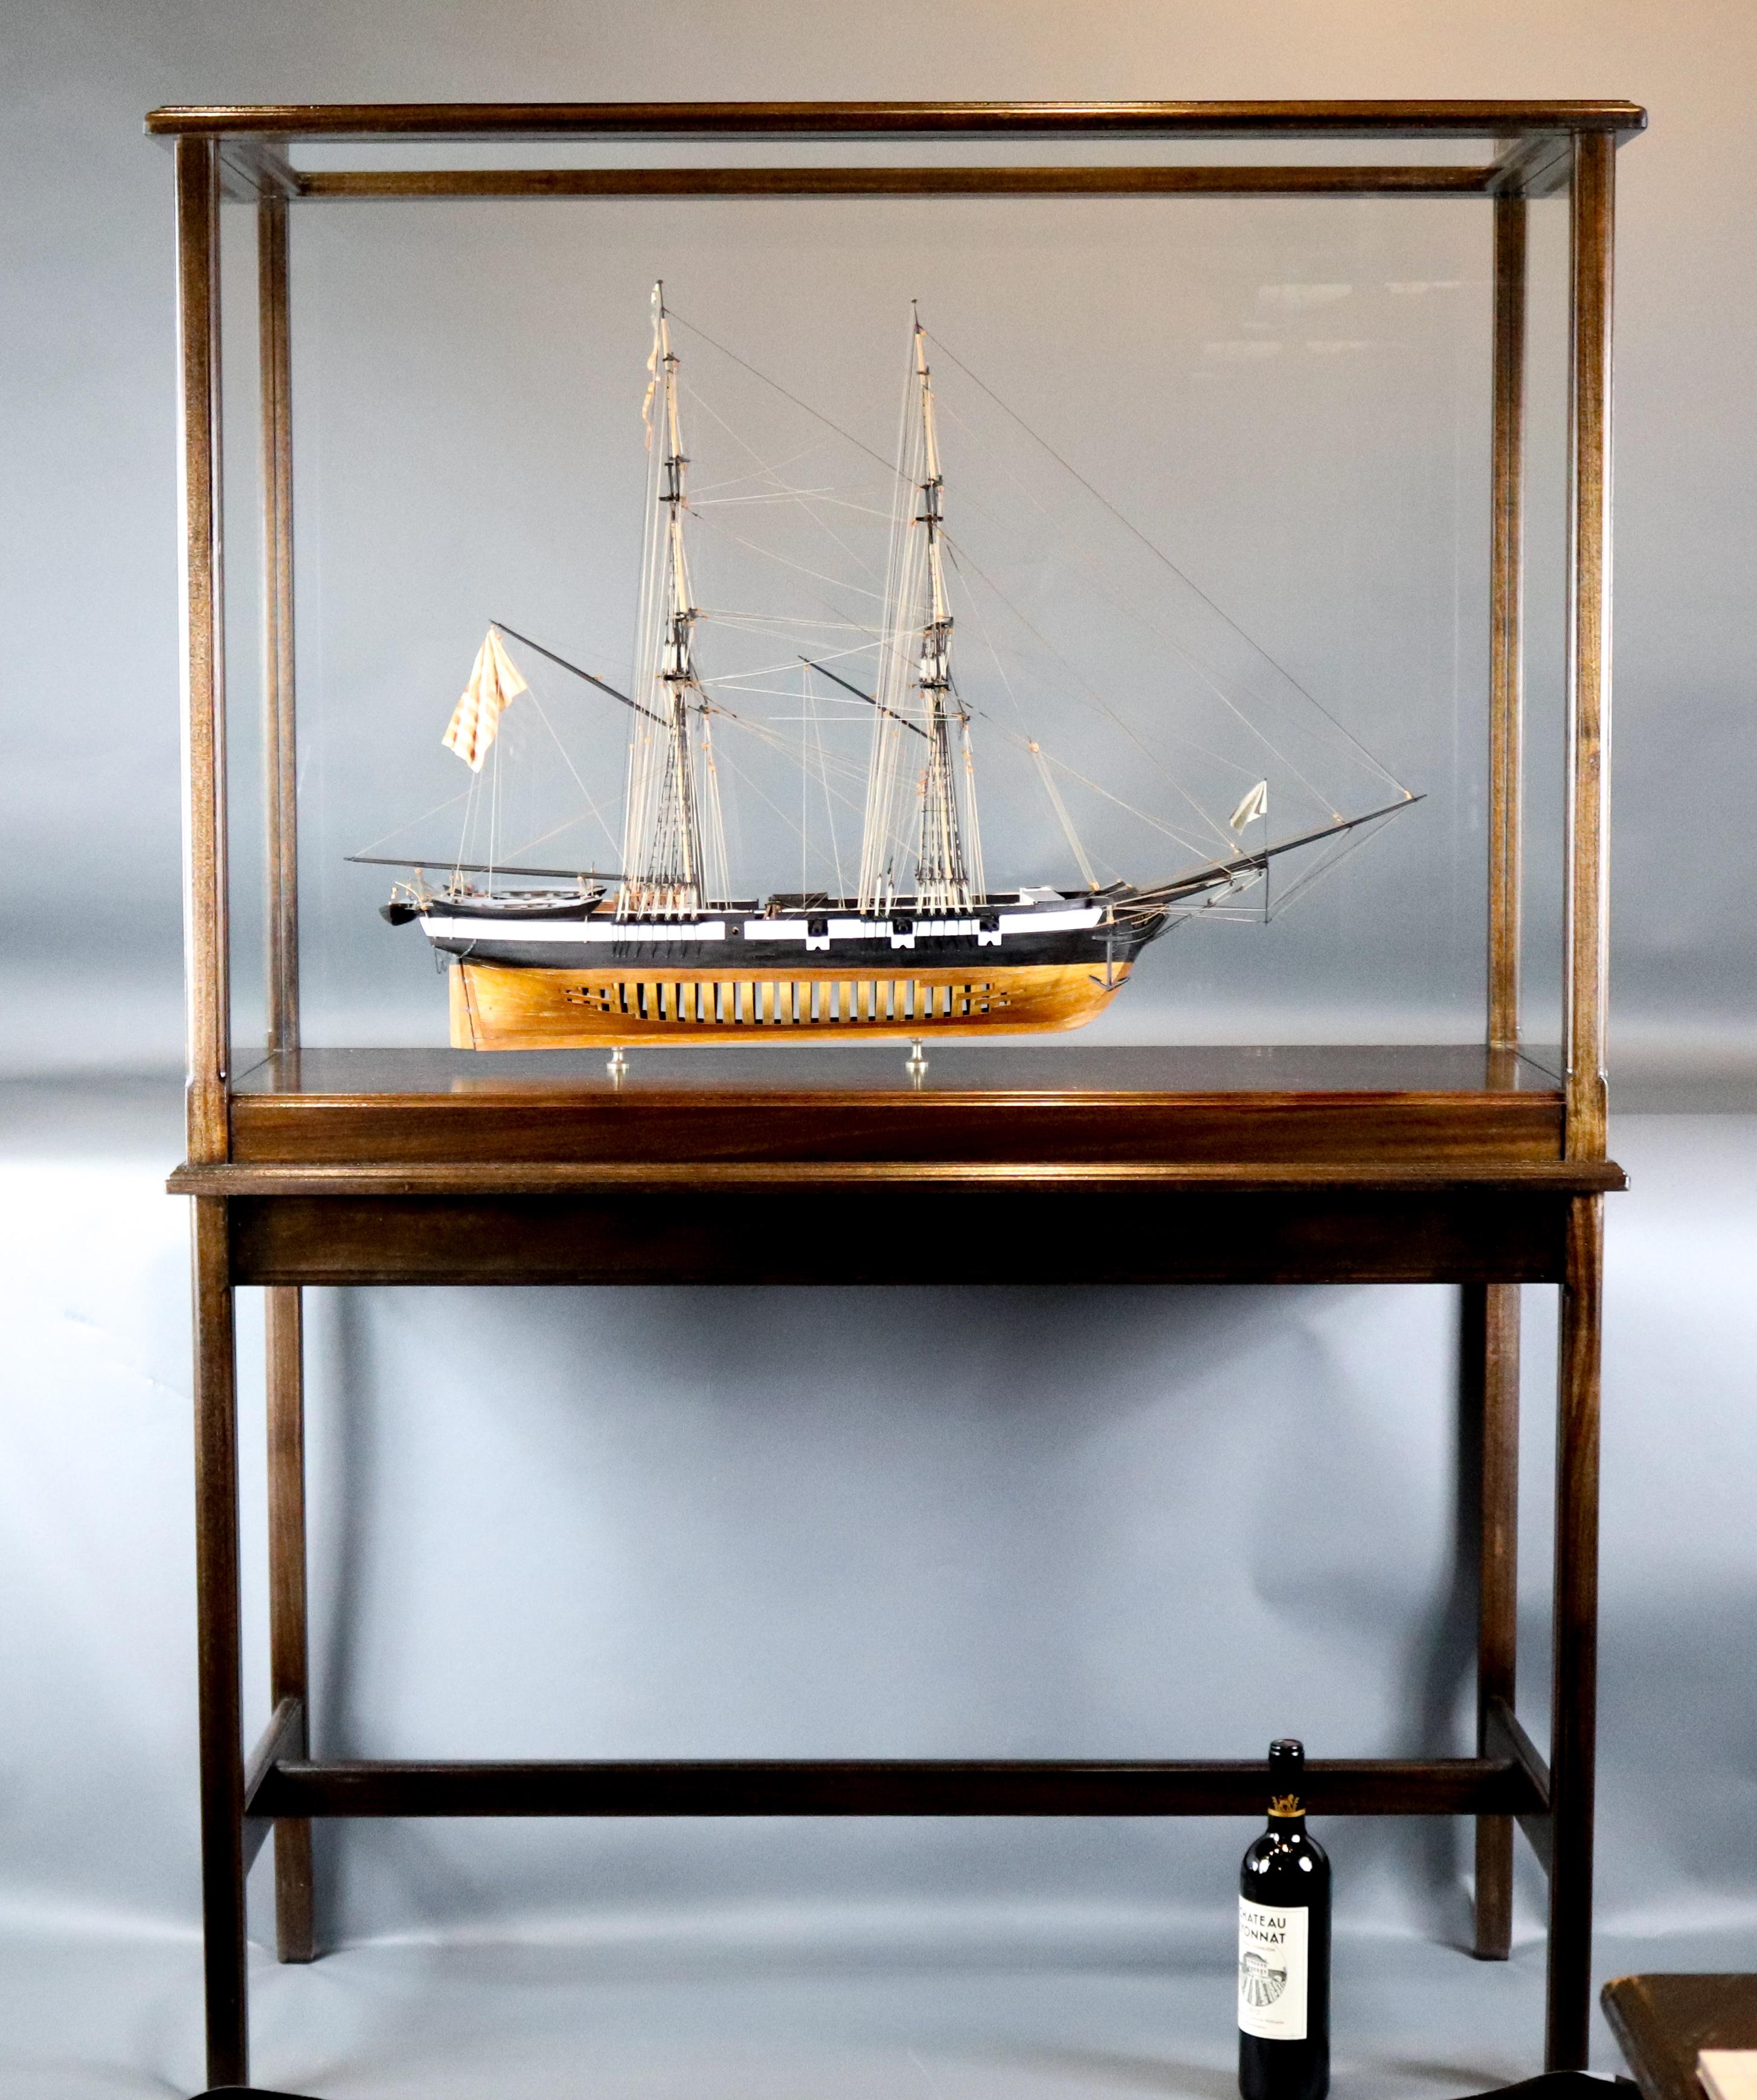 Exquisite ship model by William Hitchcock of the United States naval brig 